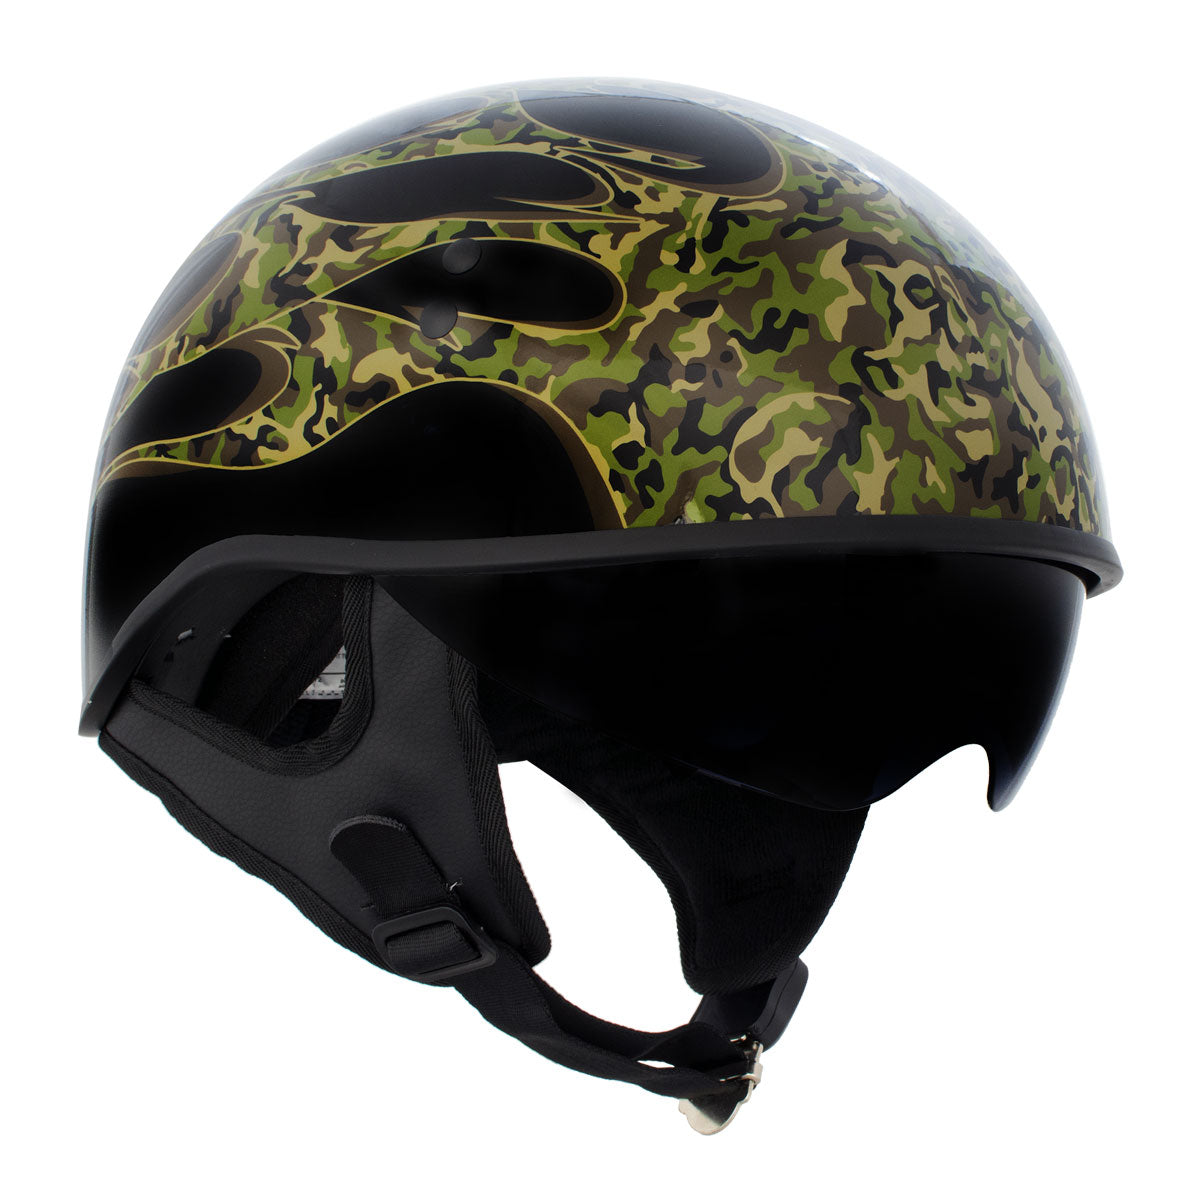 Hot Leathers HLD1047 Gloss Black 'Camo Skull Flames' Advanced DOT Skull Helmet with Drop Down Tinted Visor with Drop Down Tinted Visor